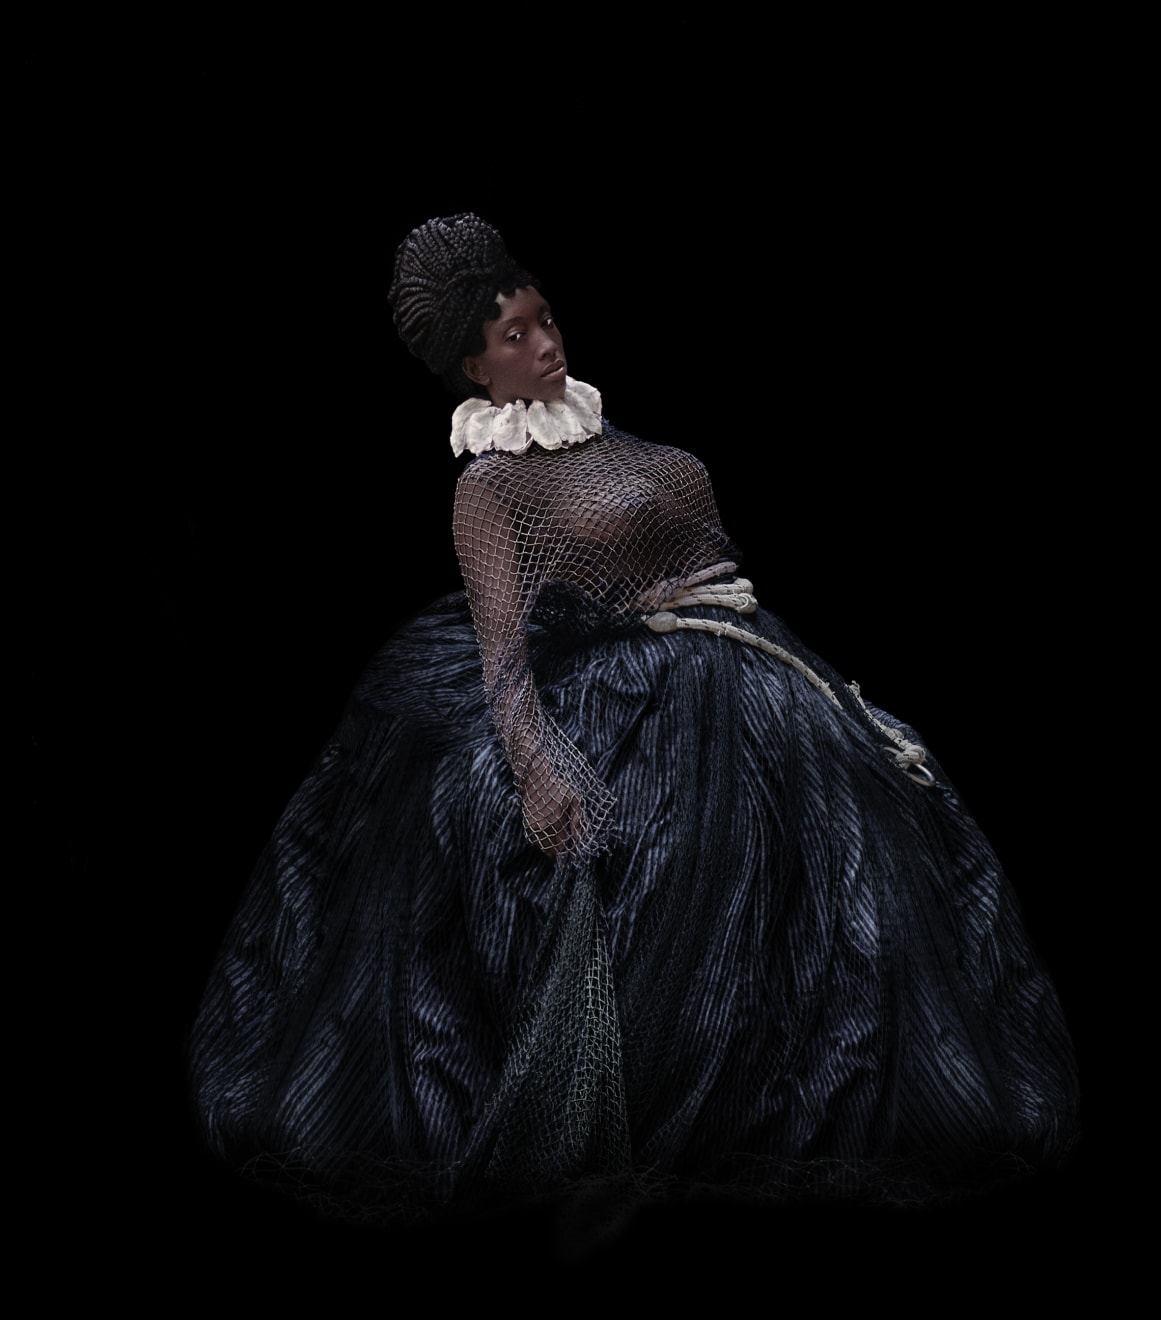 Ayana V. Jackson, Where There is Origin but No Memory II, 2019